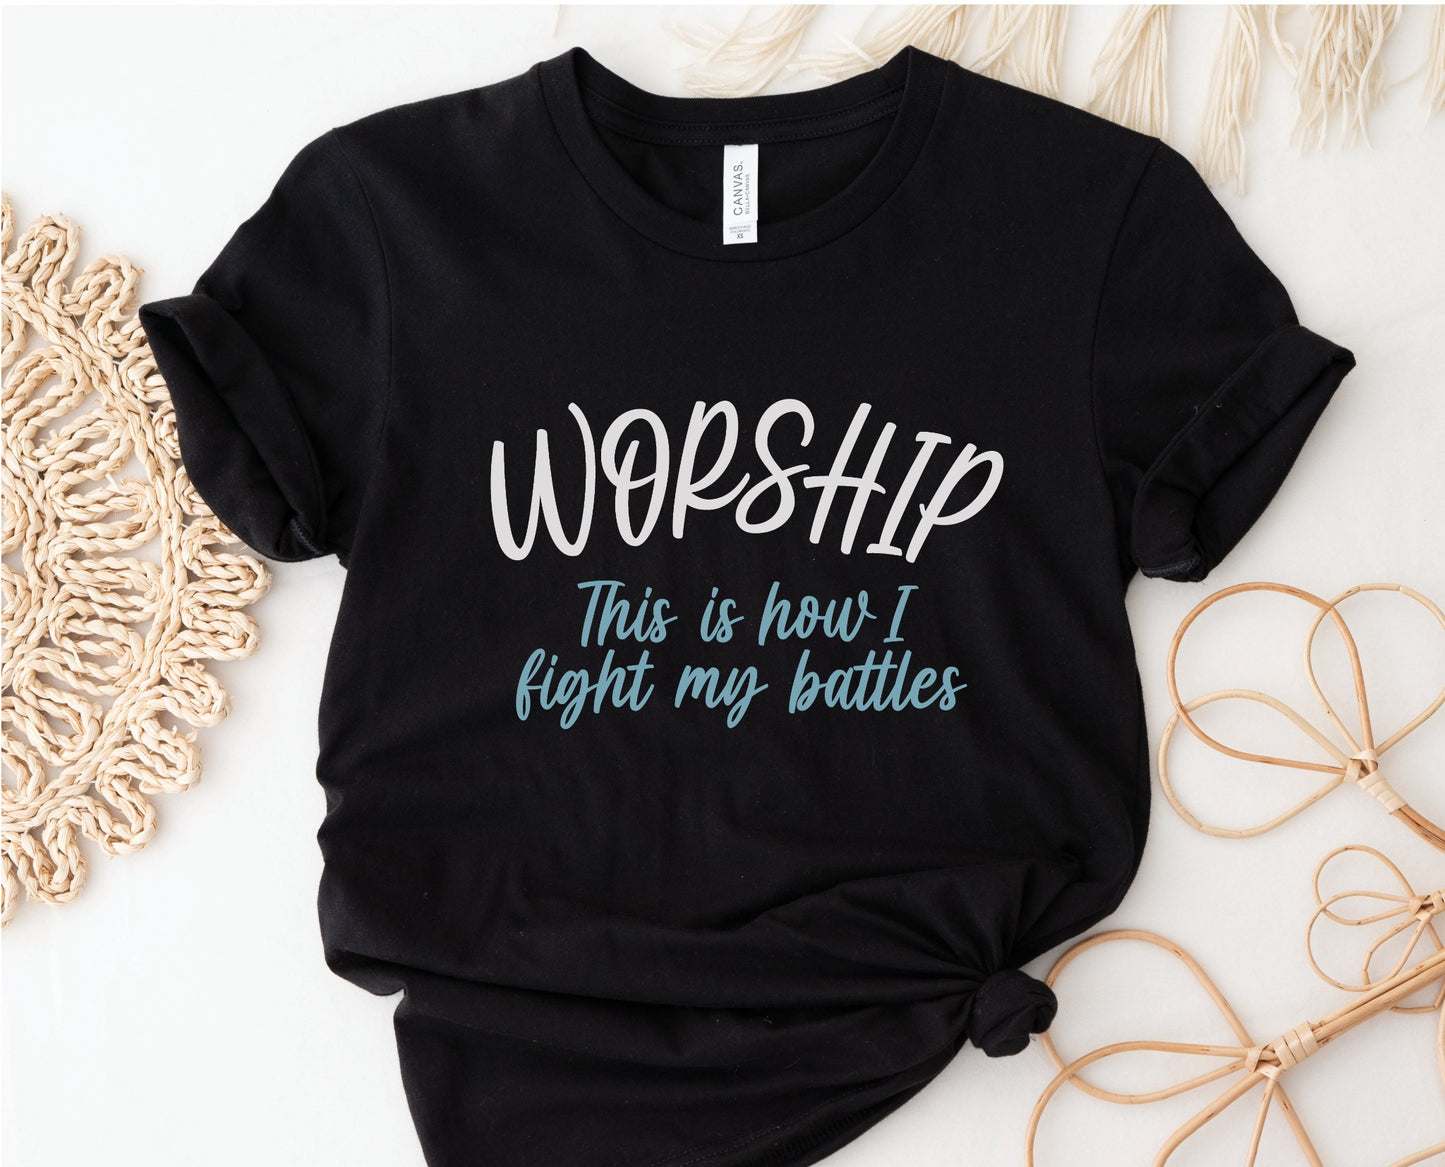 Worship This Is How I Fight My Battles Christian aesthetic t-shirt design printed in white and teal on soft black tee for women, great gift for worship leaders